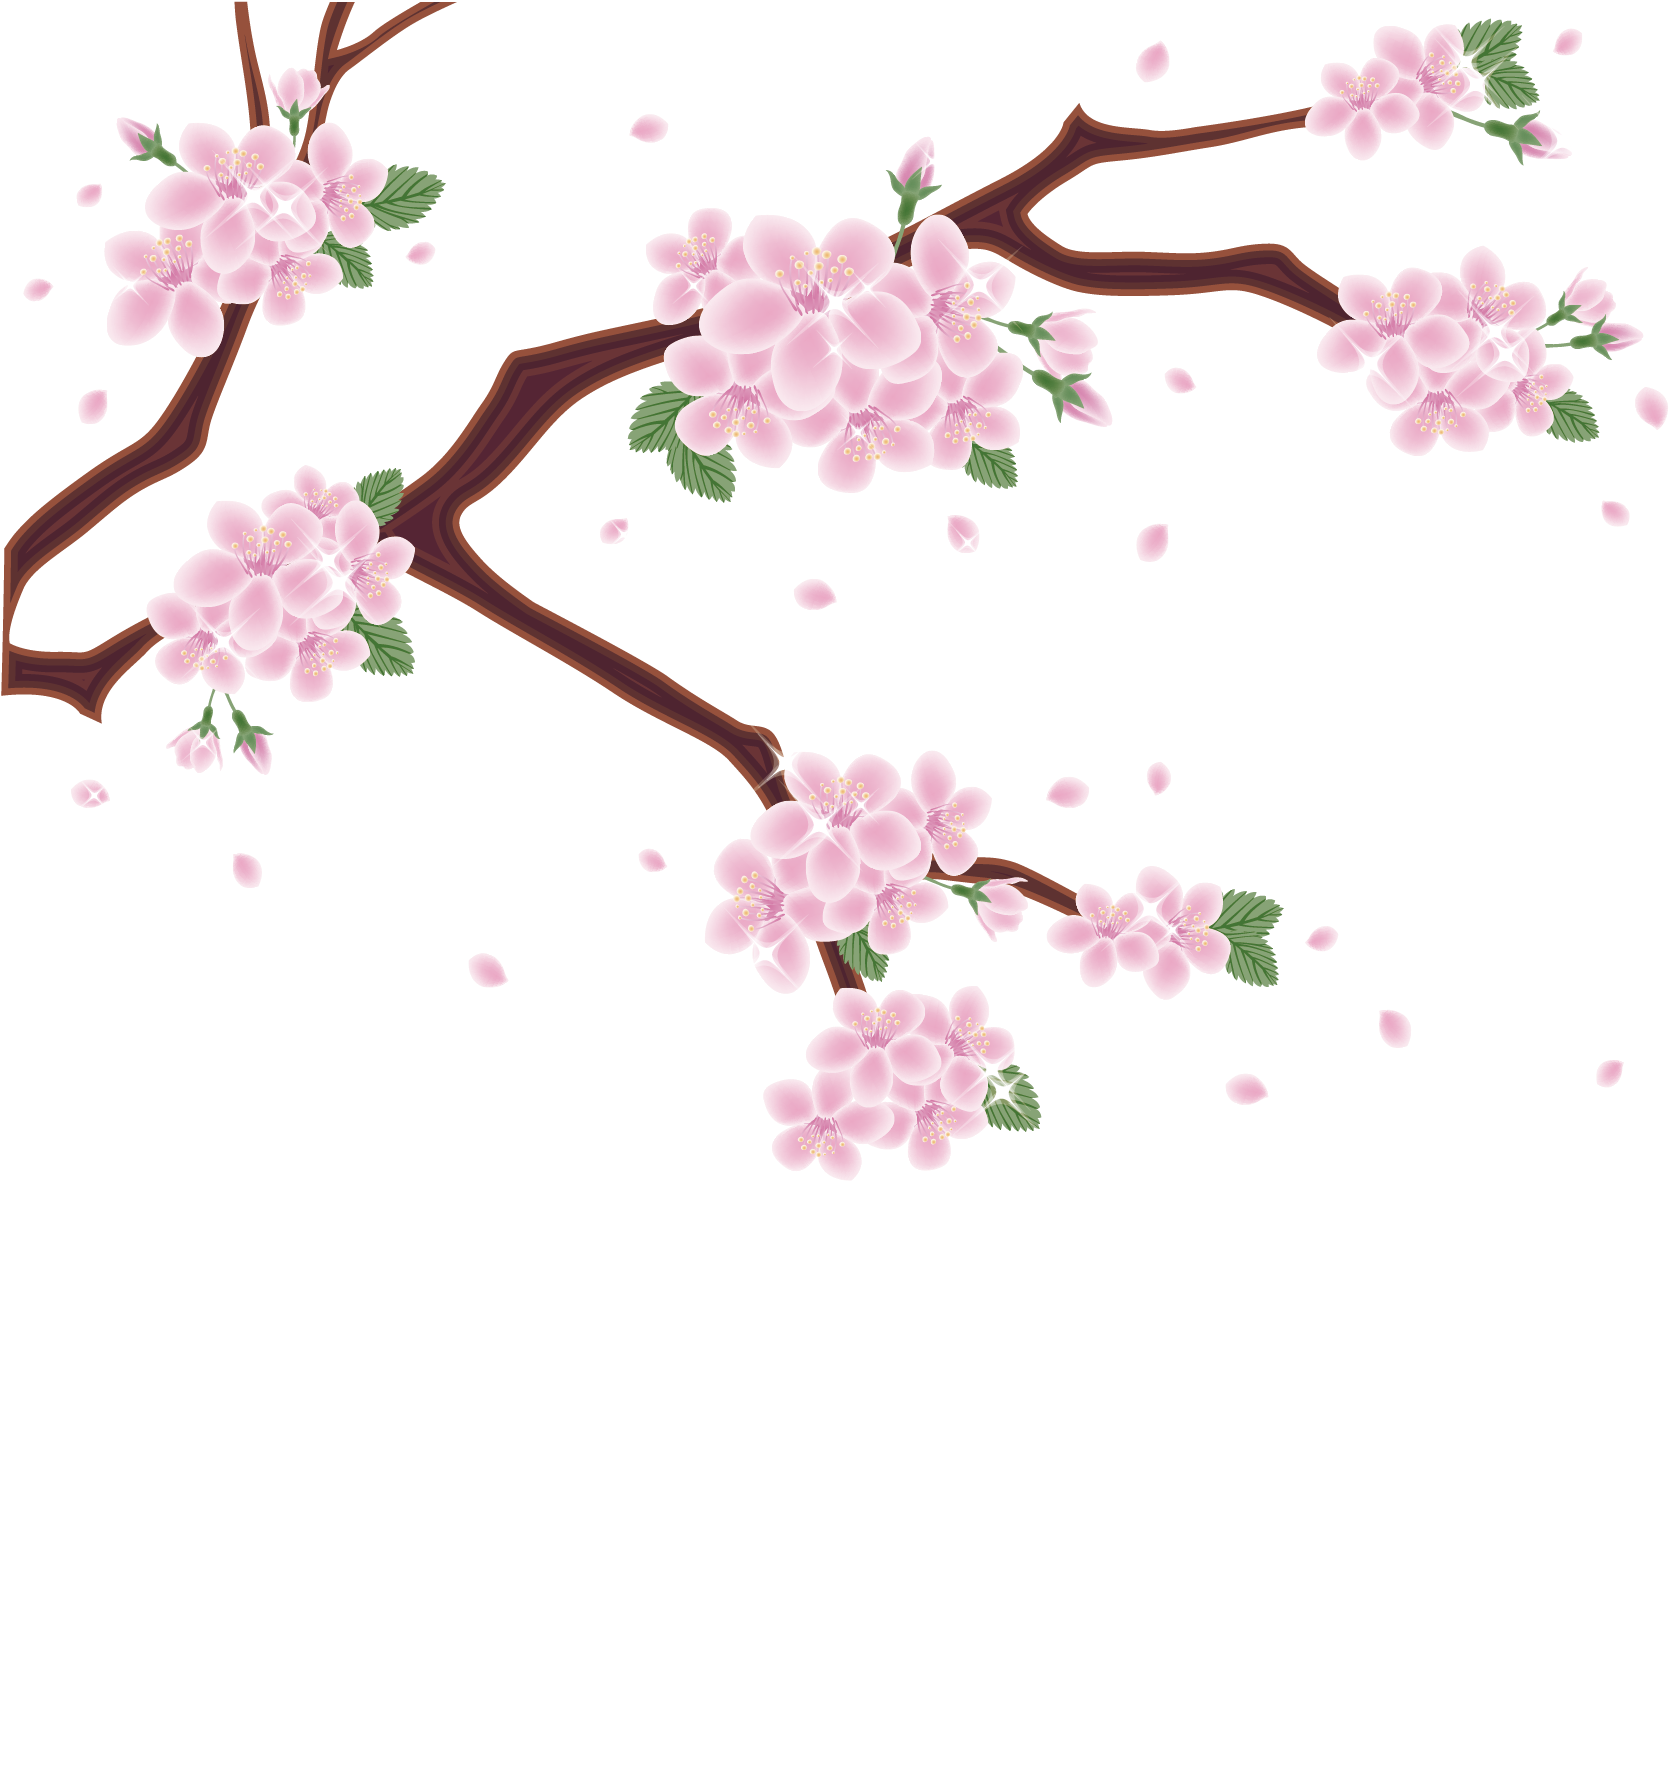 A Branch With Pink Flowers And Leaves